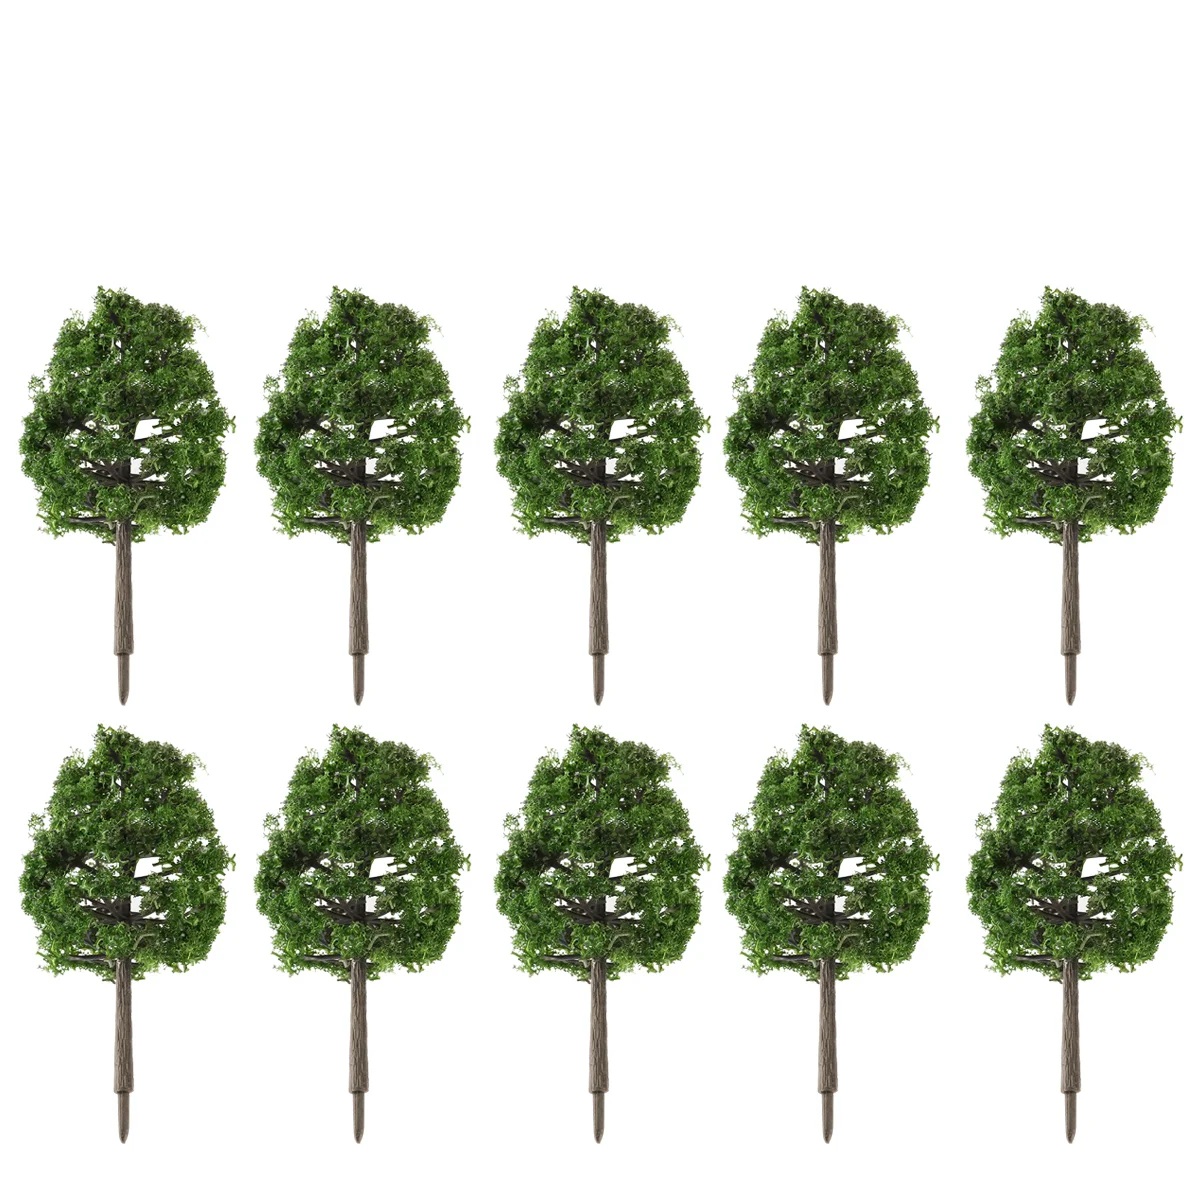 

Model Trees Scenery Model, 20pcs Simulation Trees Durable 9CM Architectural Landscape Tree Model Scenery for Garden Pot Office